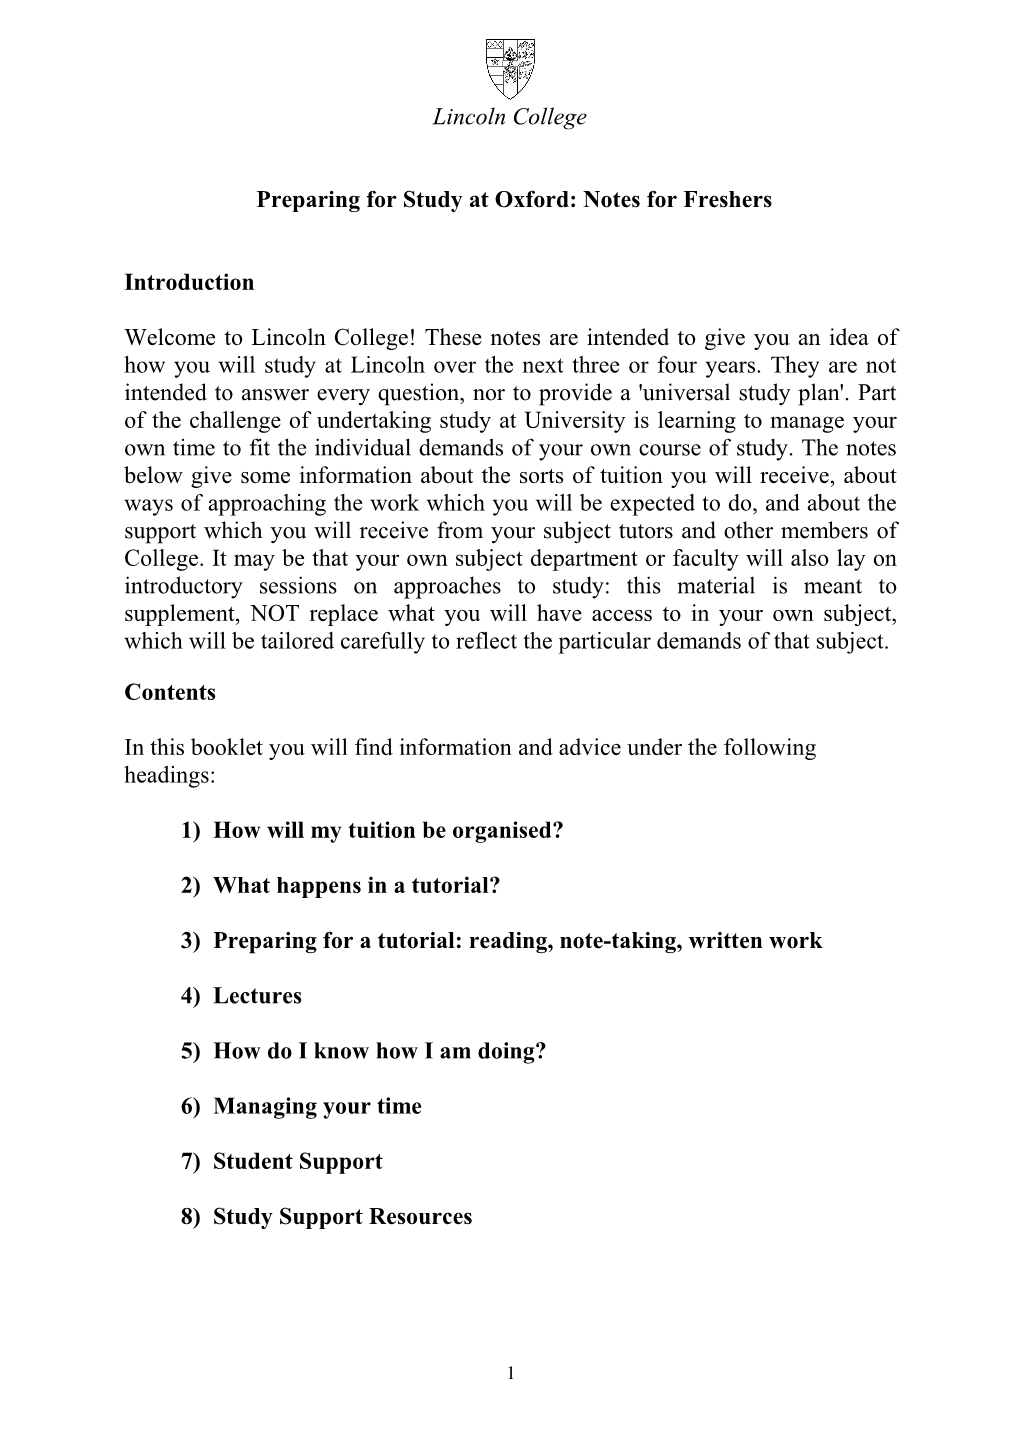 Preparing for Study at Oxford: Notes for Freshers